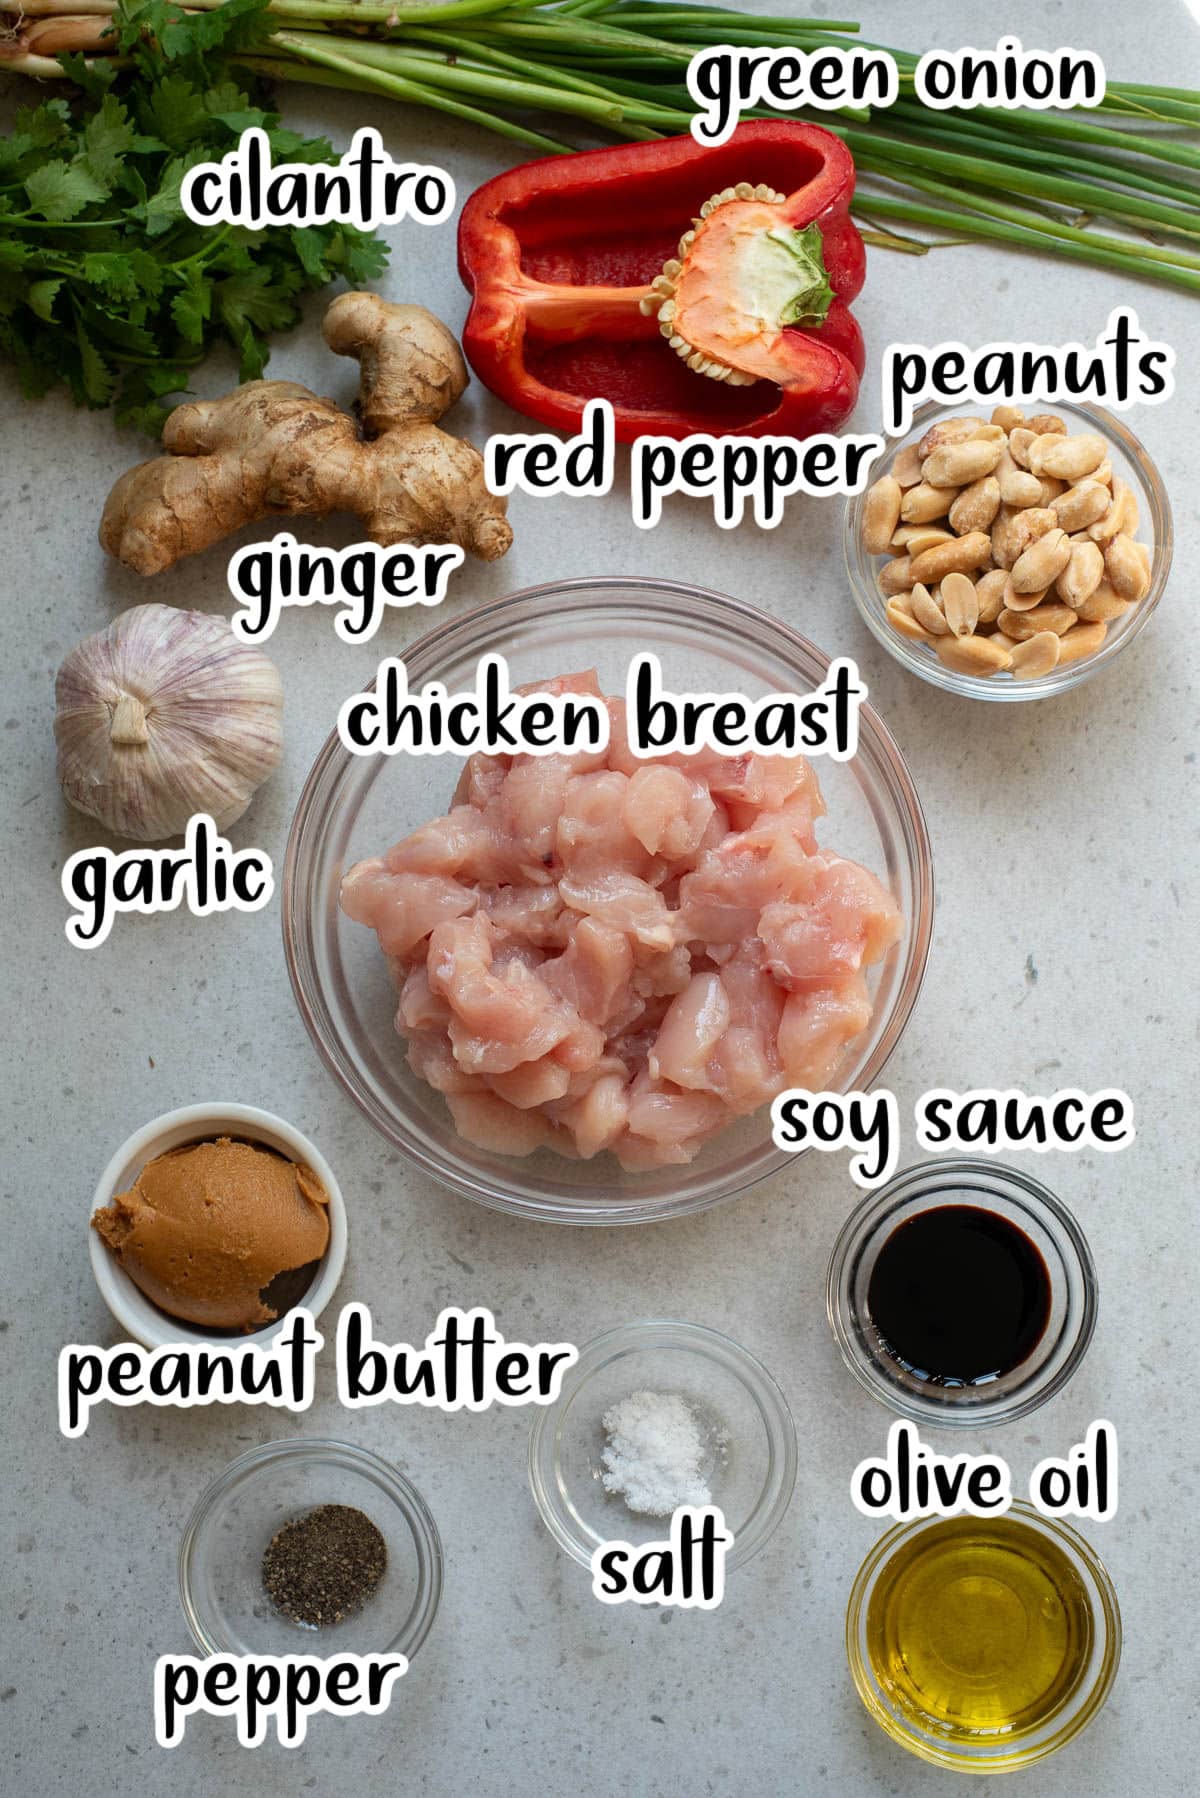 Ingredients for Chinese ginger chicken.